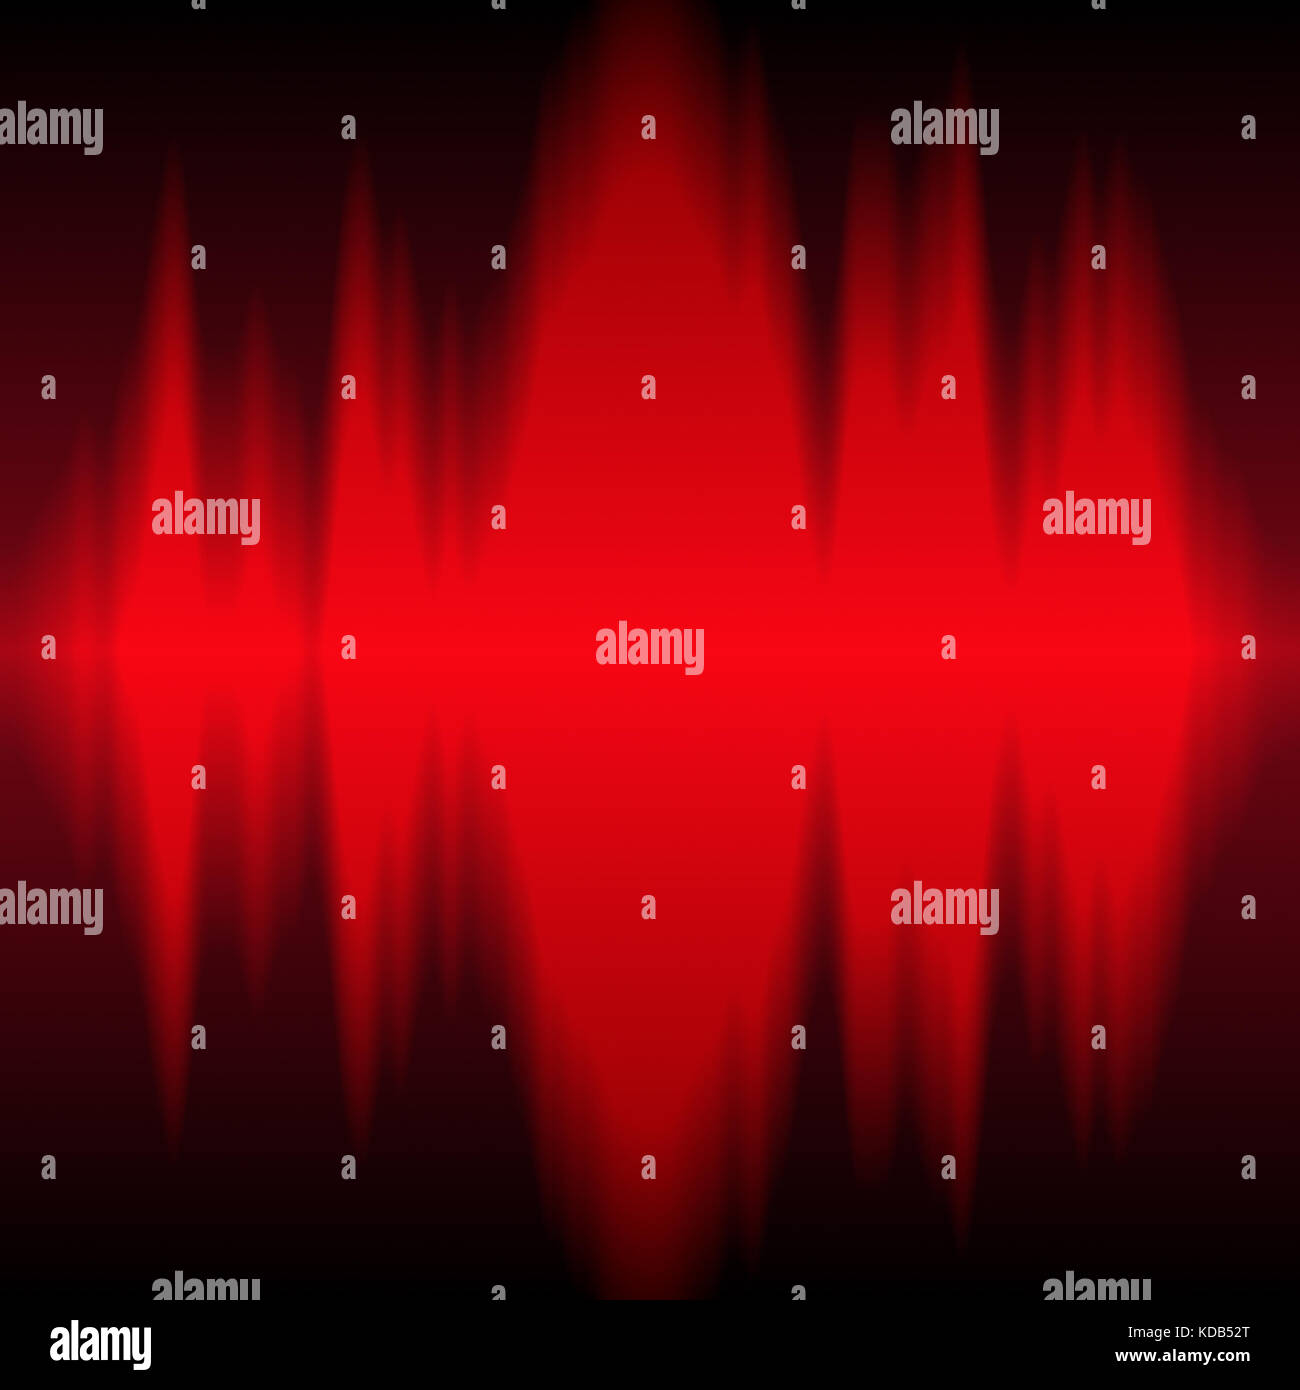 Red frequency display closeup view Stock Photo